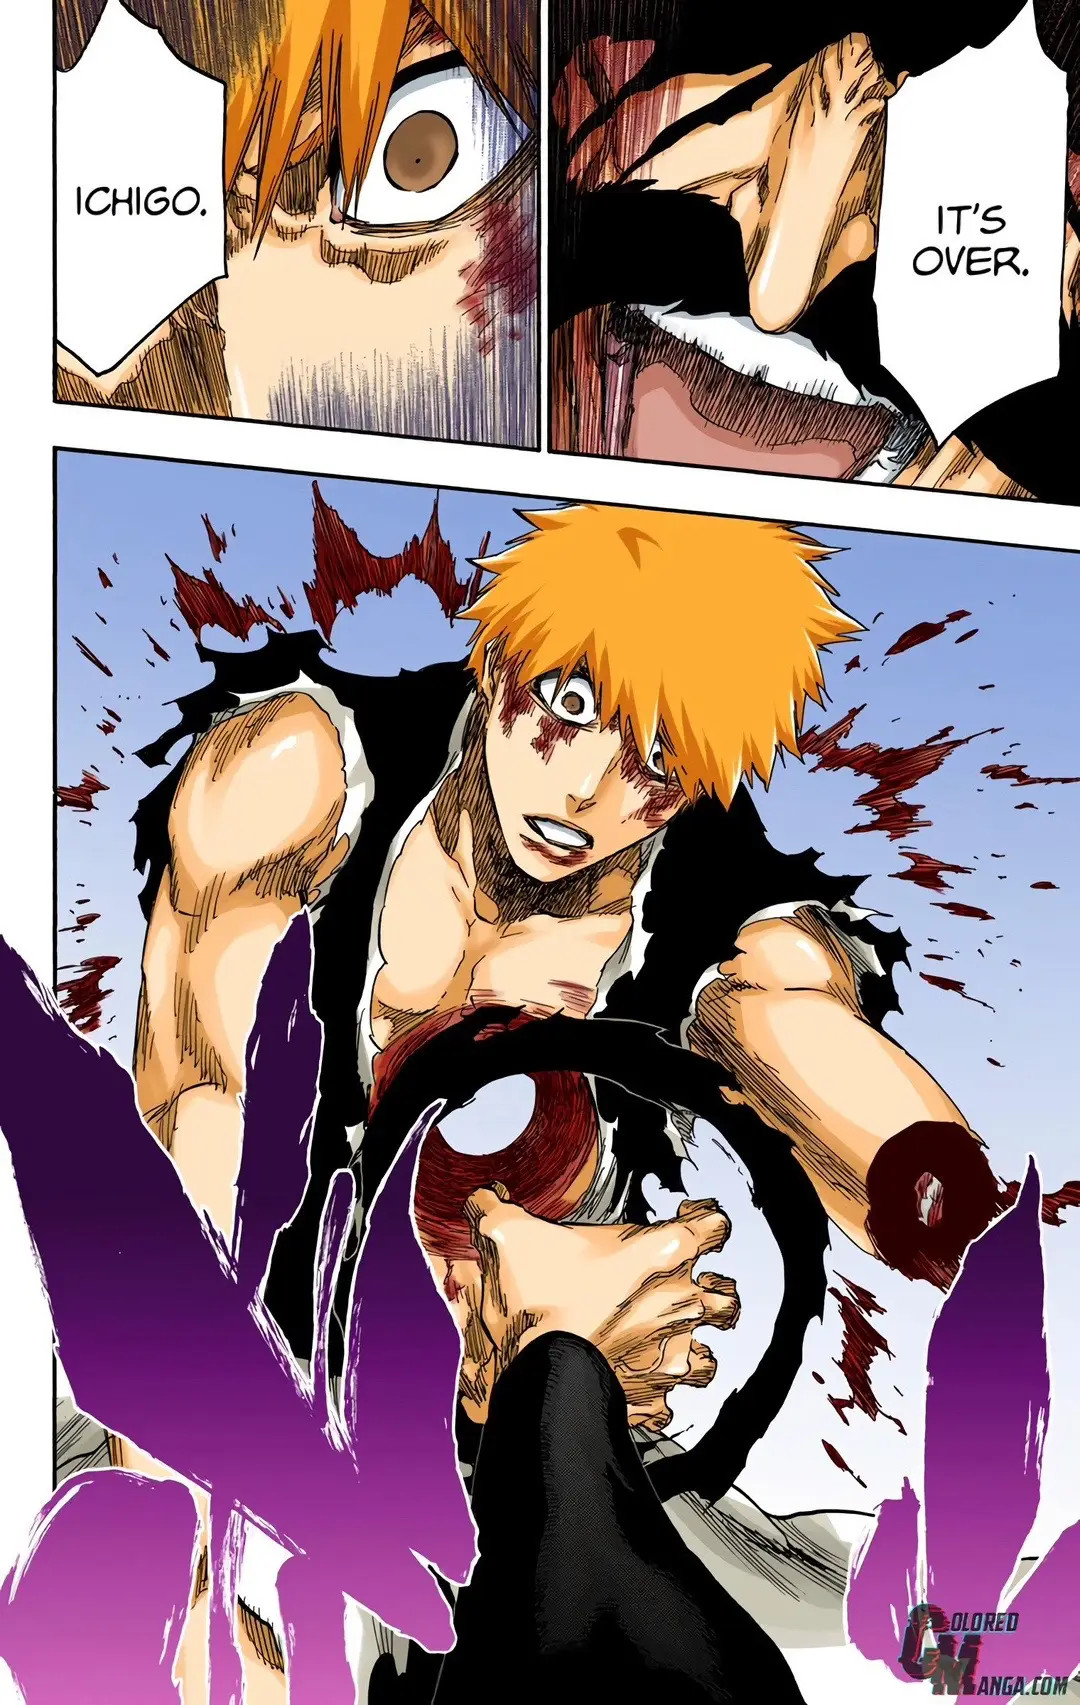 THE GOAT SHONEN VILLAIN KEEPS WINNING!! Ichigo and Aizen vs Yhwach cannot come quick enough. Once that gets animated in the Bleach Thousand-Year Blood War anime its going to go down as the greatest fight of all time. TYBW anime is going to cook! Watch Bleach Boys podcast!  #tybw #bleach #aizen #yhwach #ichigo #anime #manga 